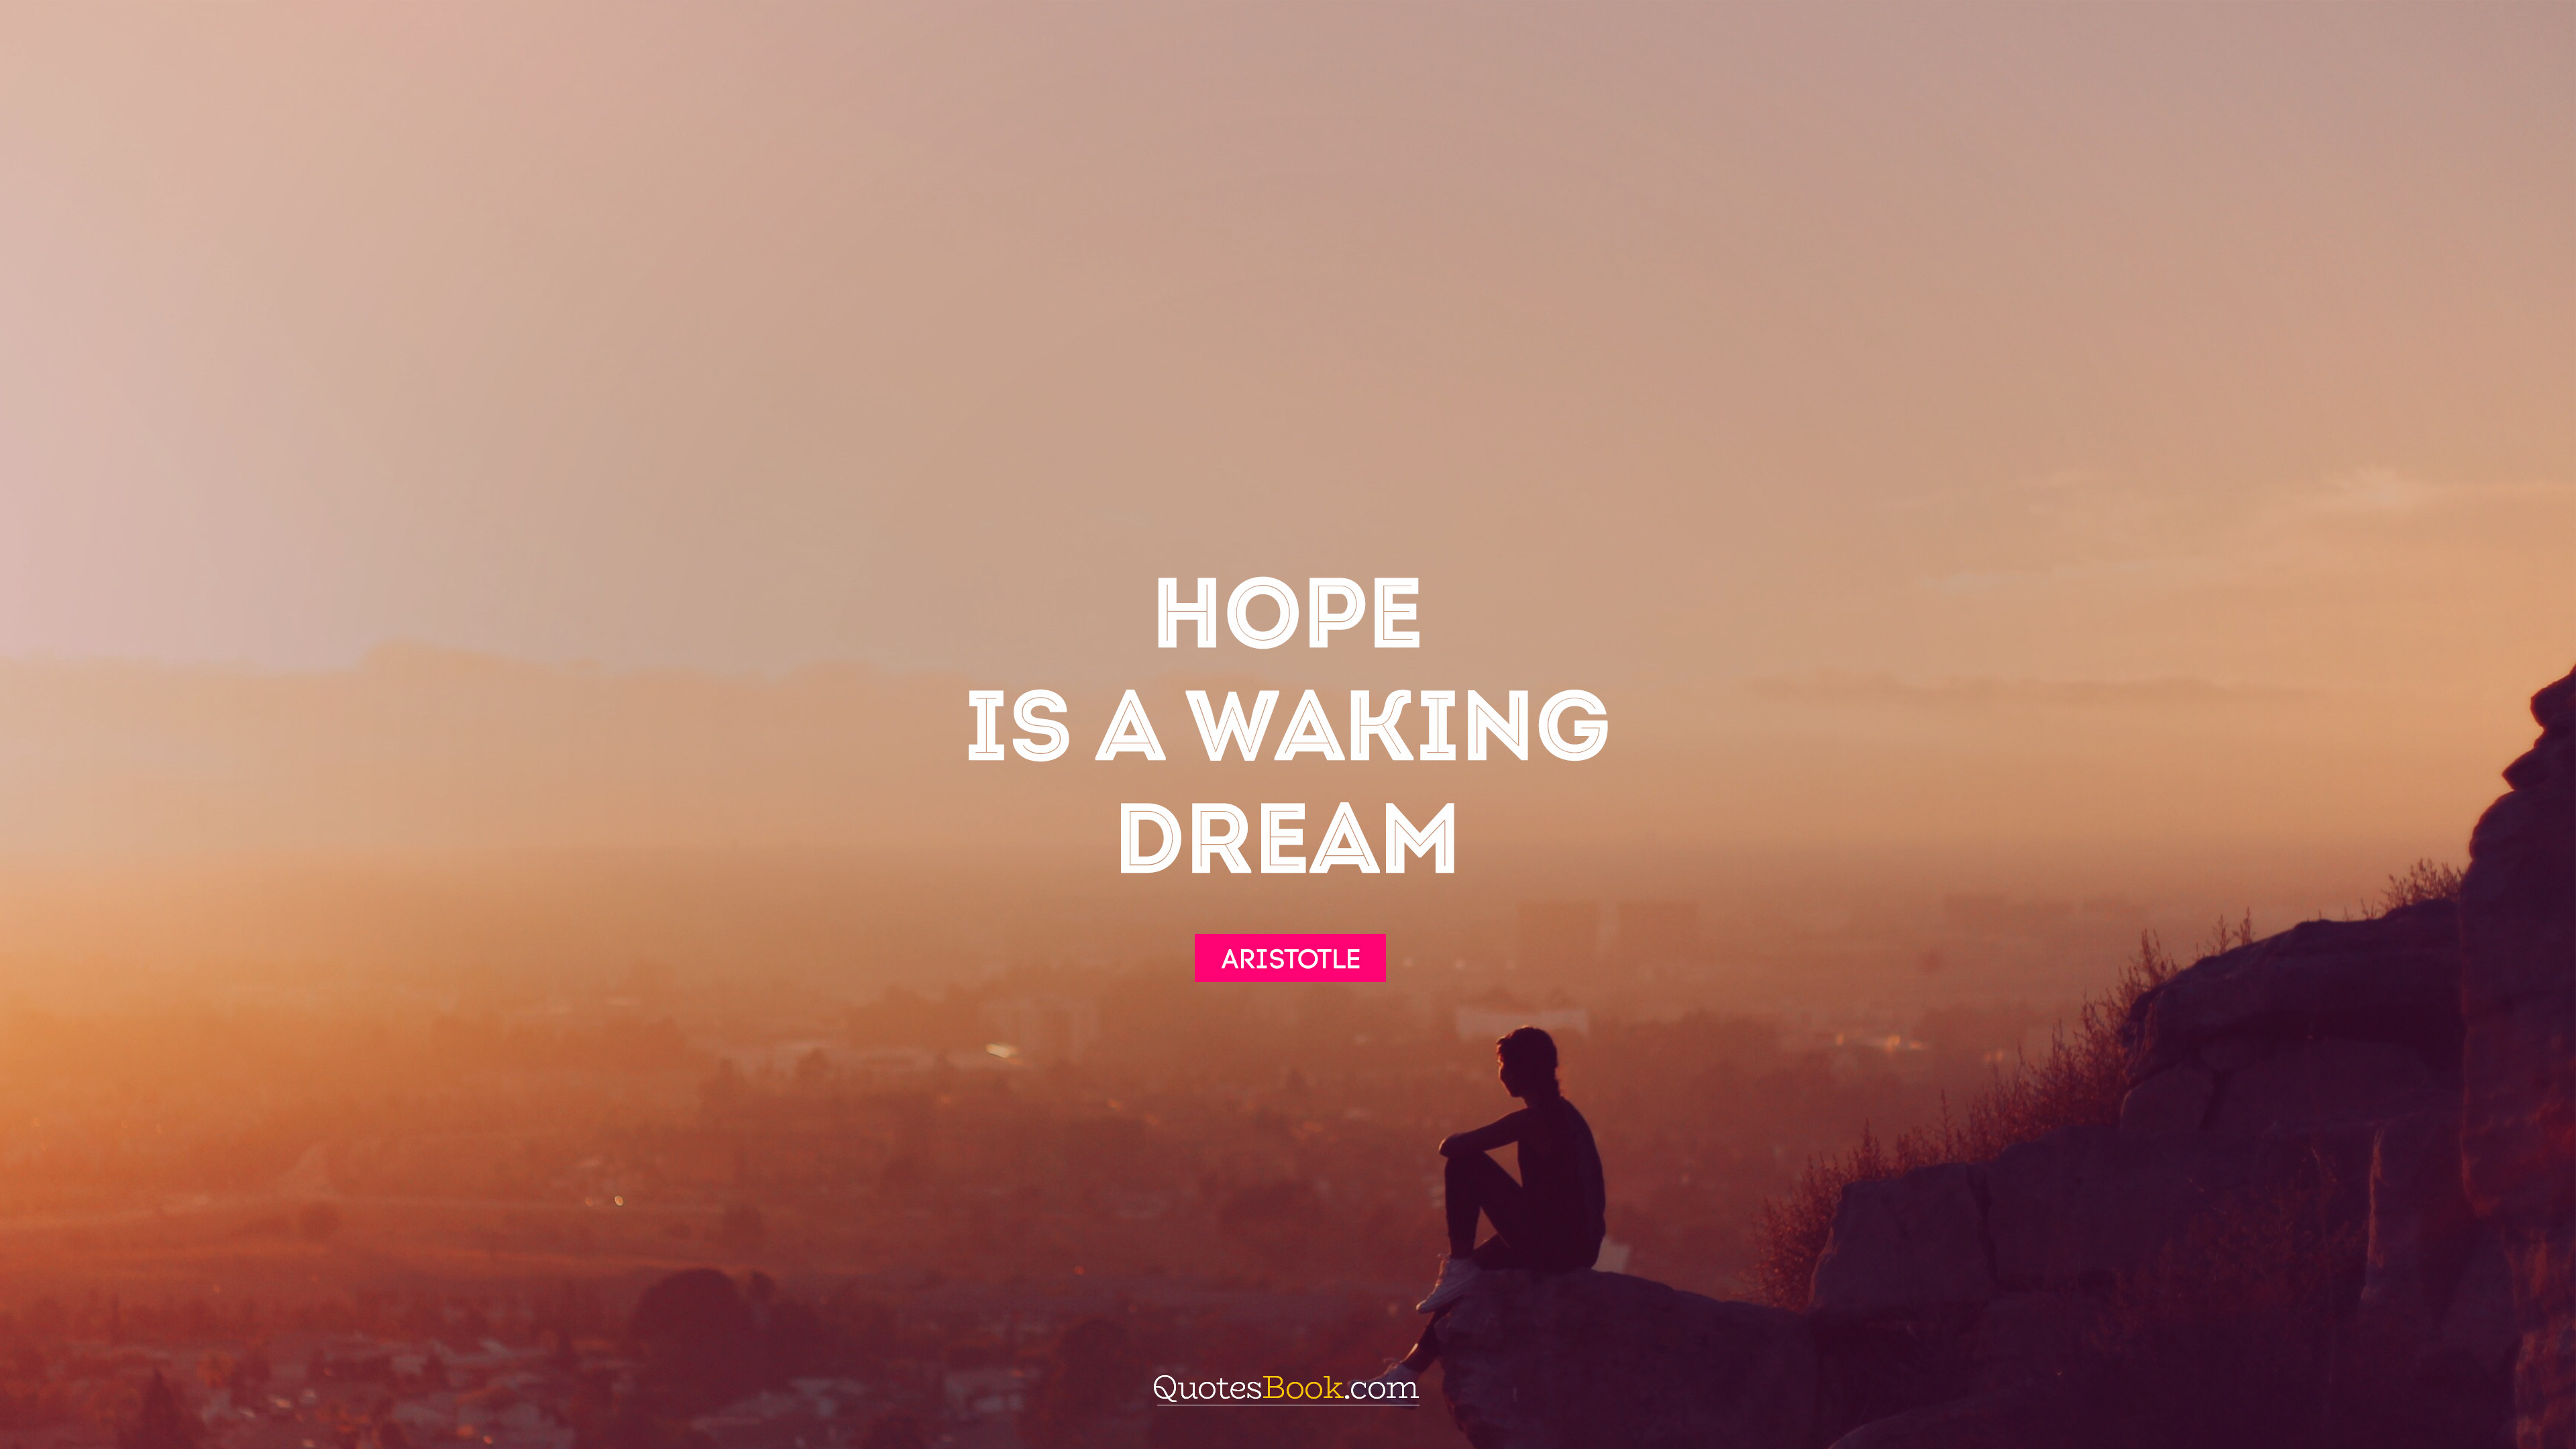 Hope is a waking dream. - Quote by Aristotle - QuotesBook